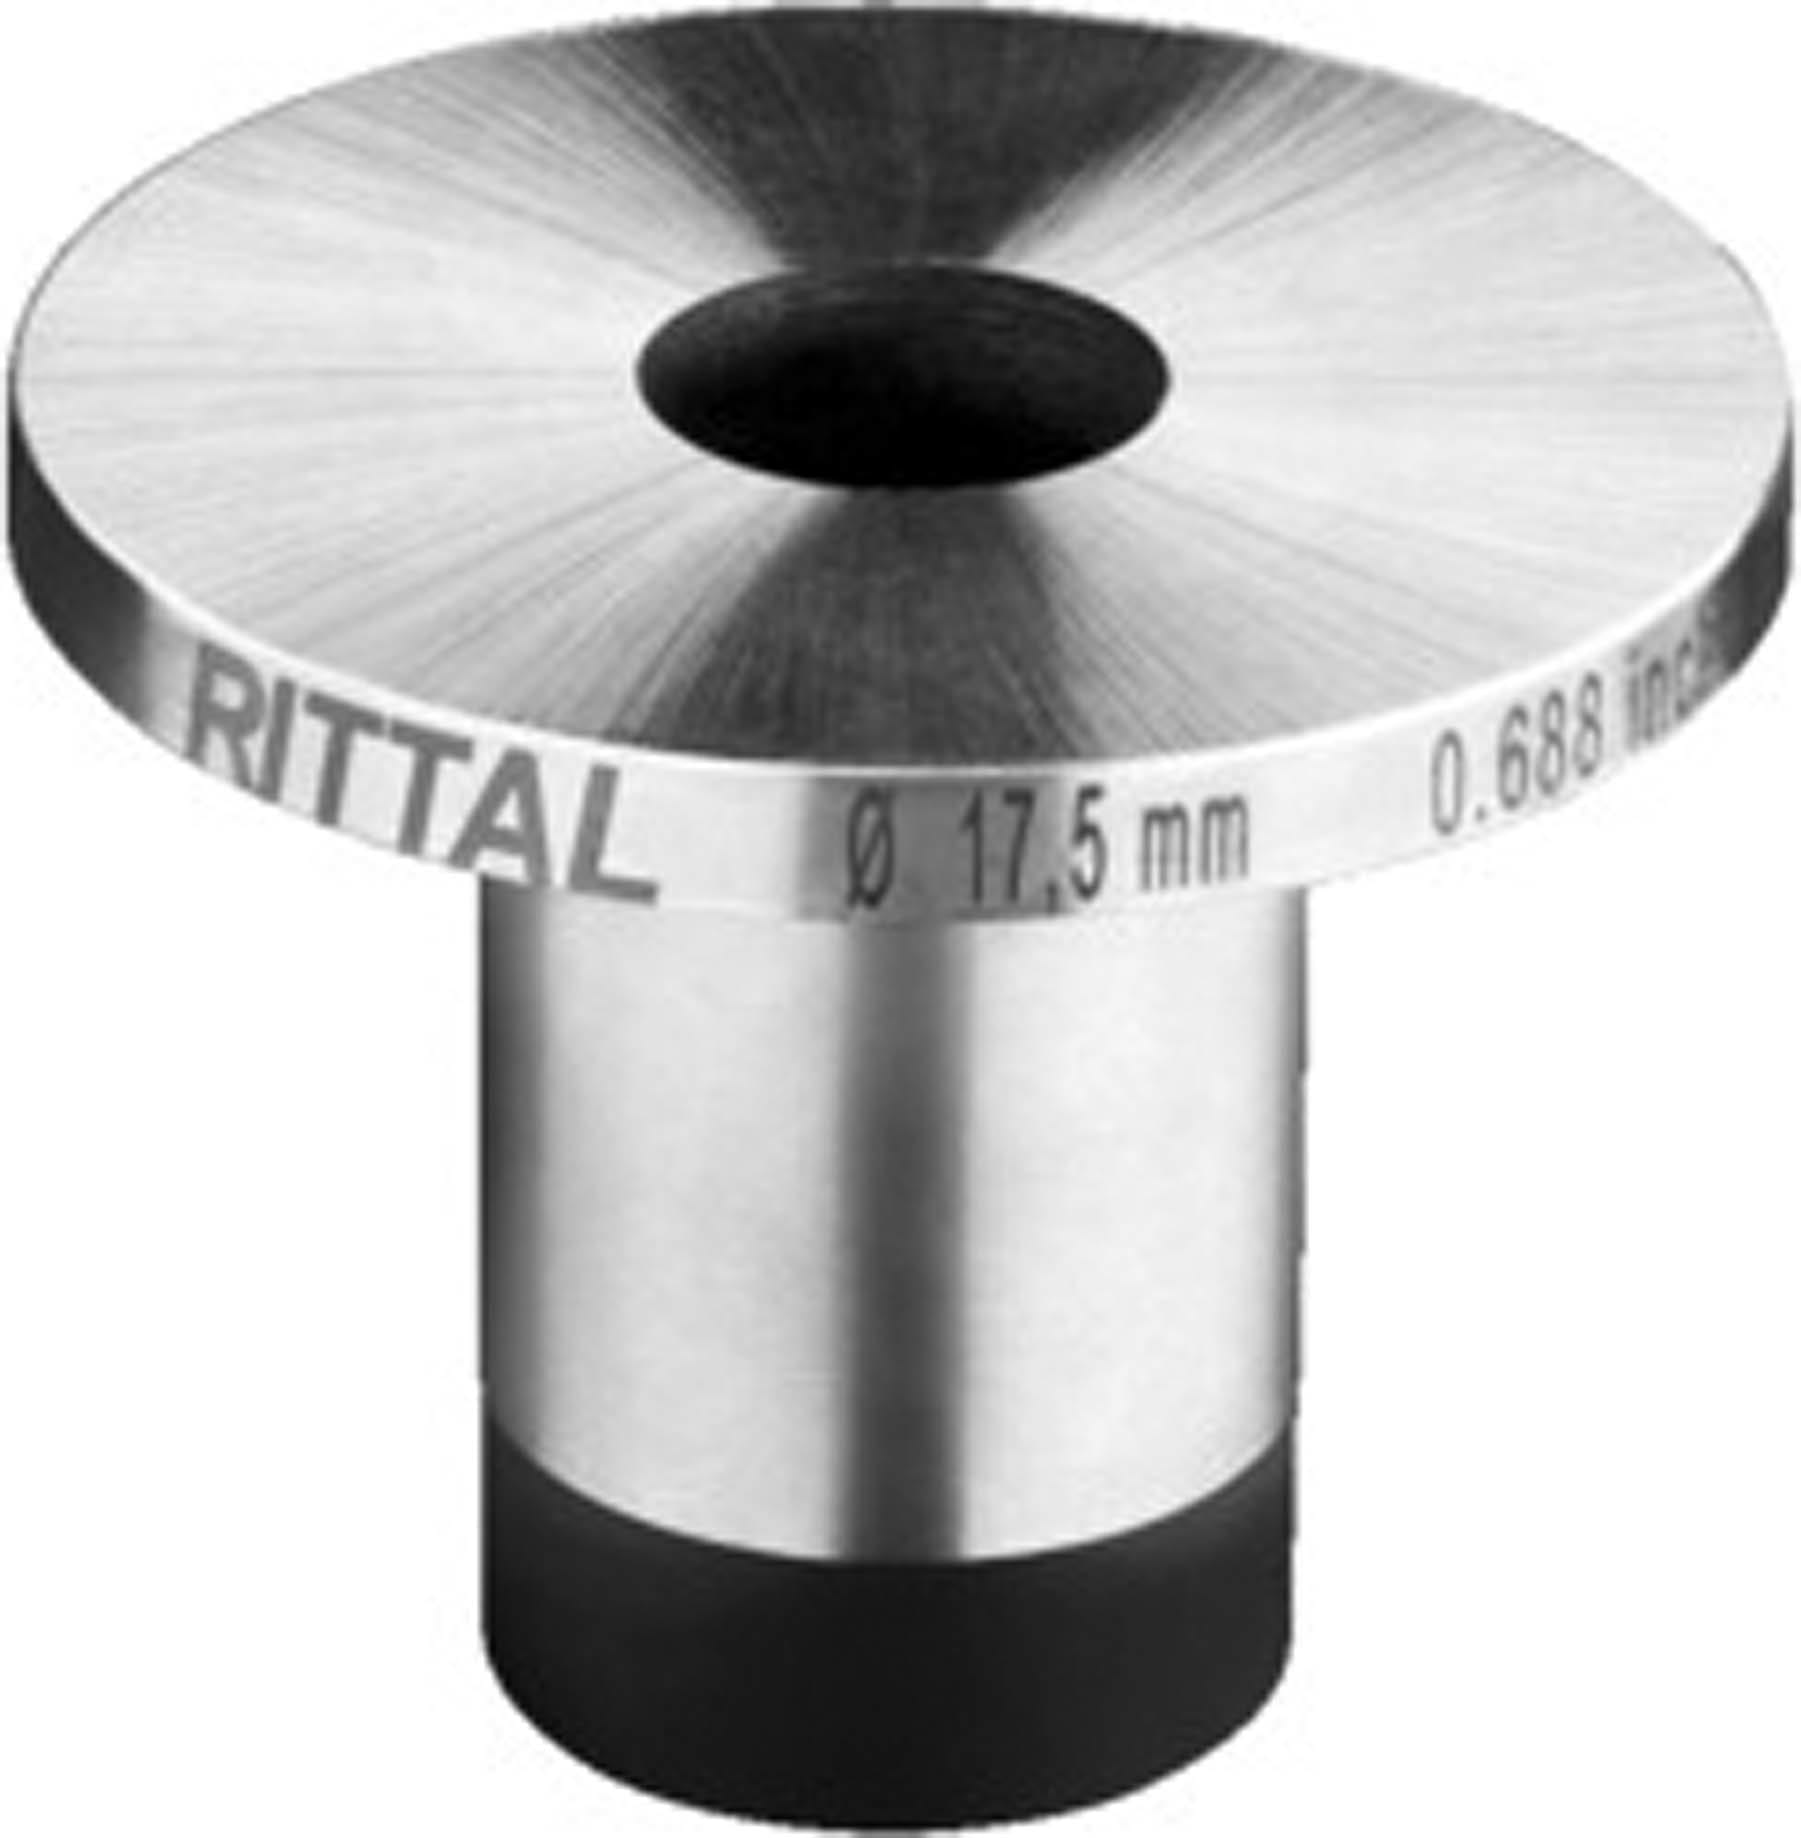 Rittal - Matrice ronde 11,0 mm gamme automation systems